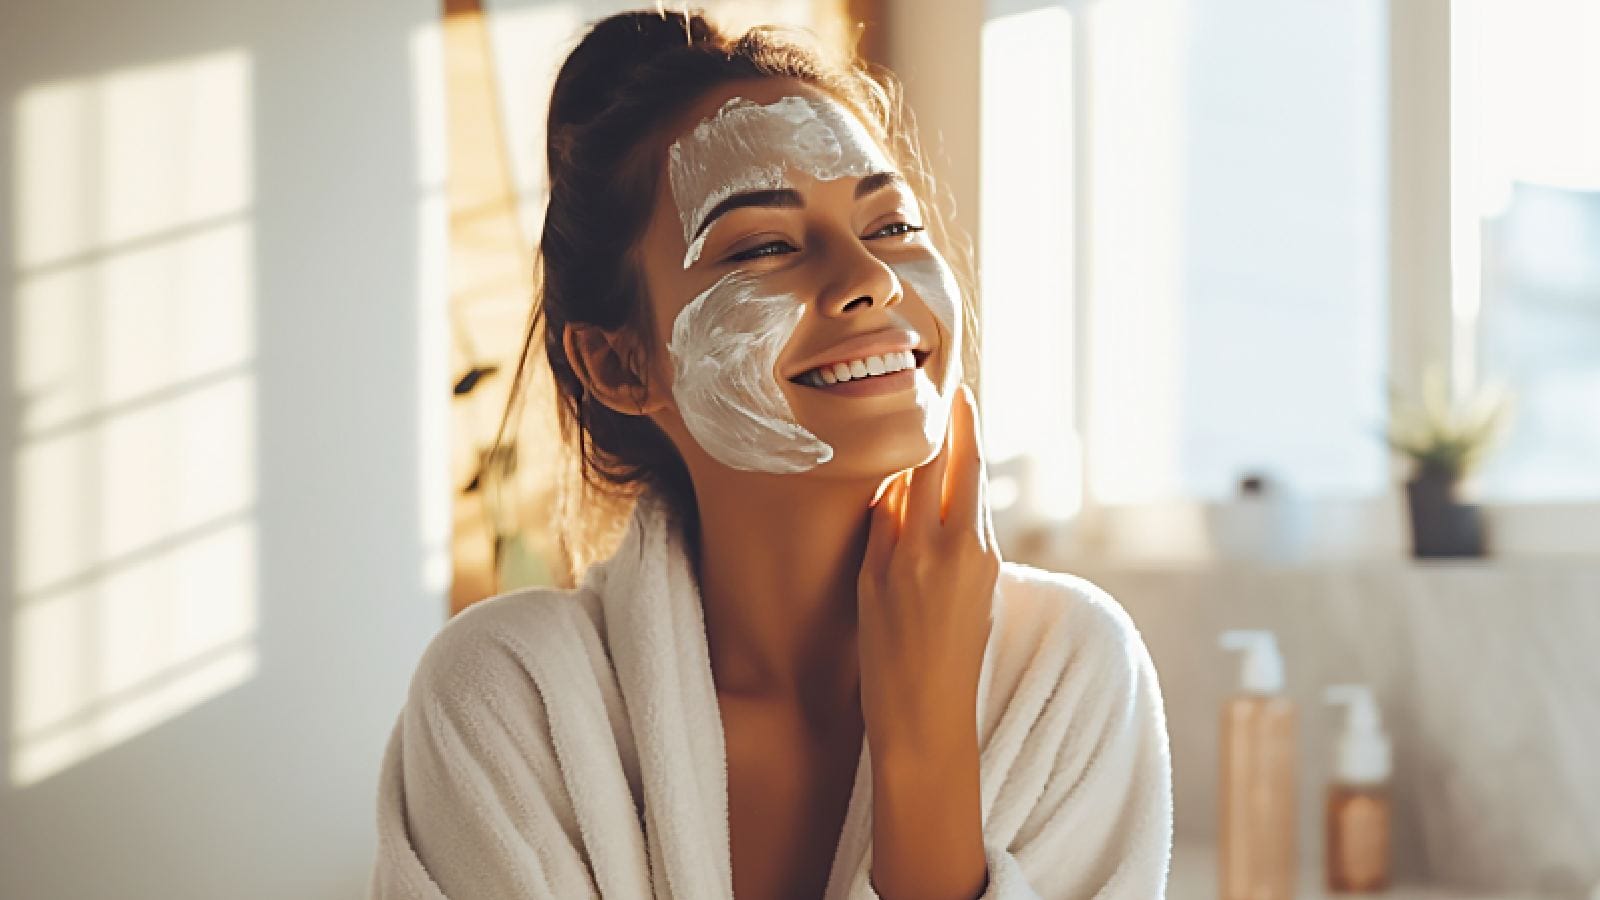 6 best tan removal face packs to get radiant skin